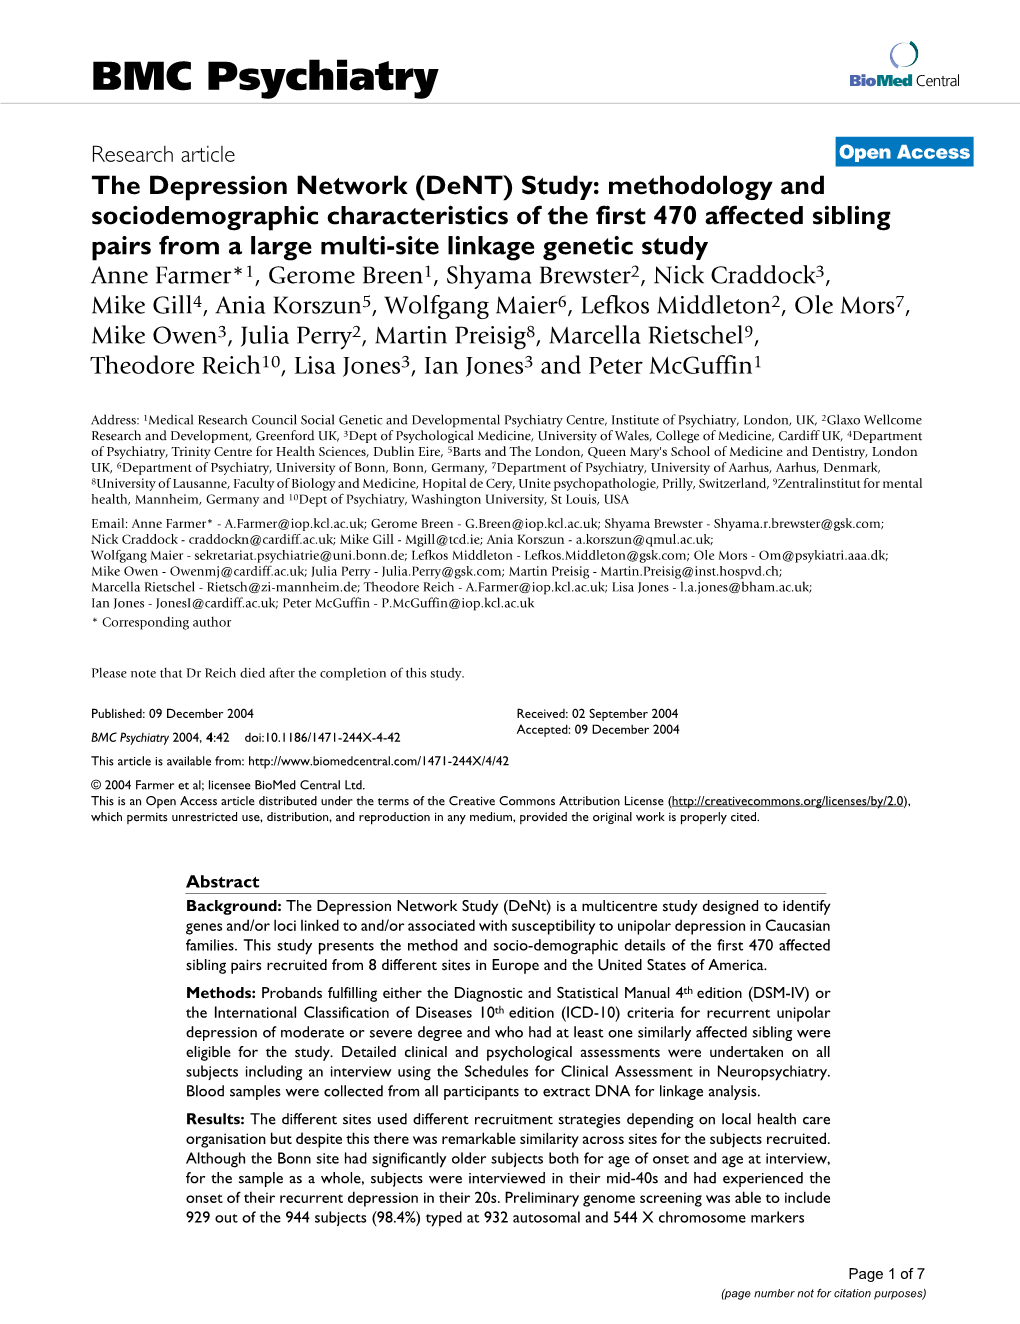 The Depression Network (Dent) Study: Methodology And